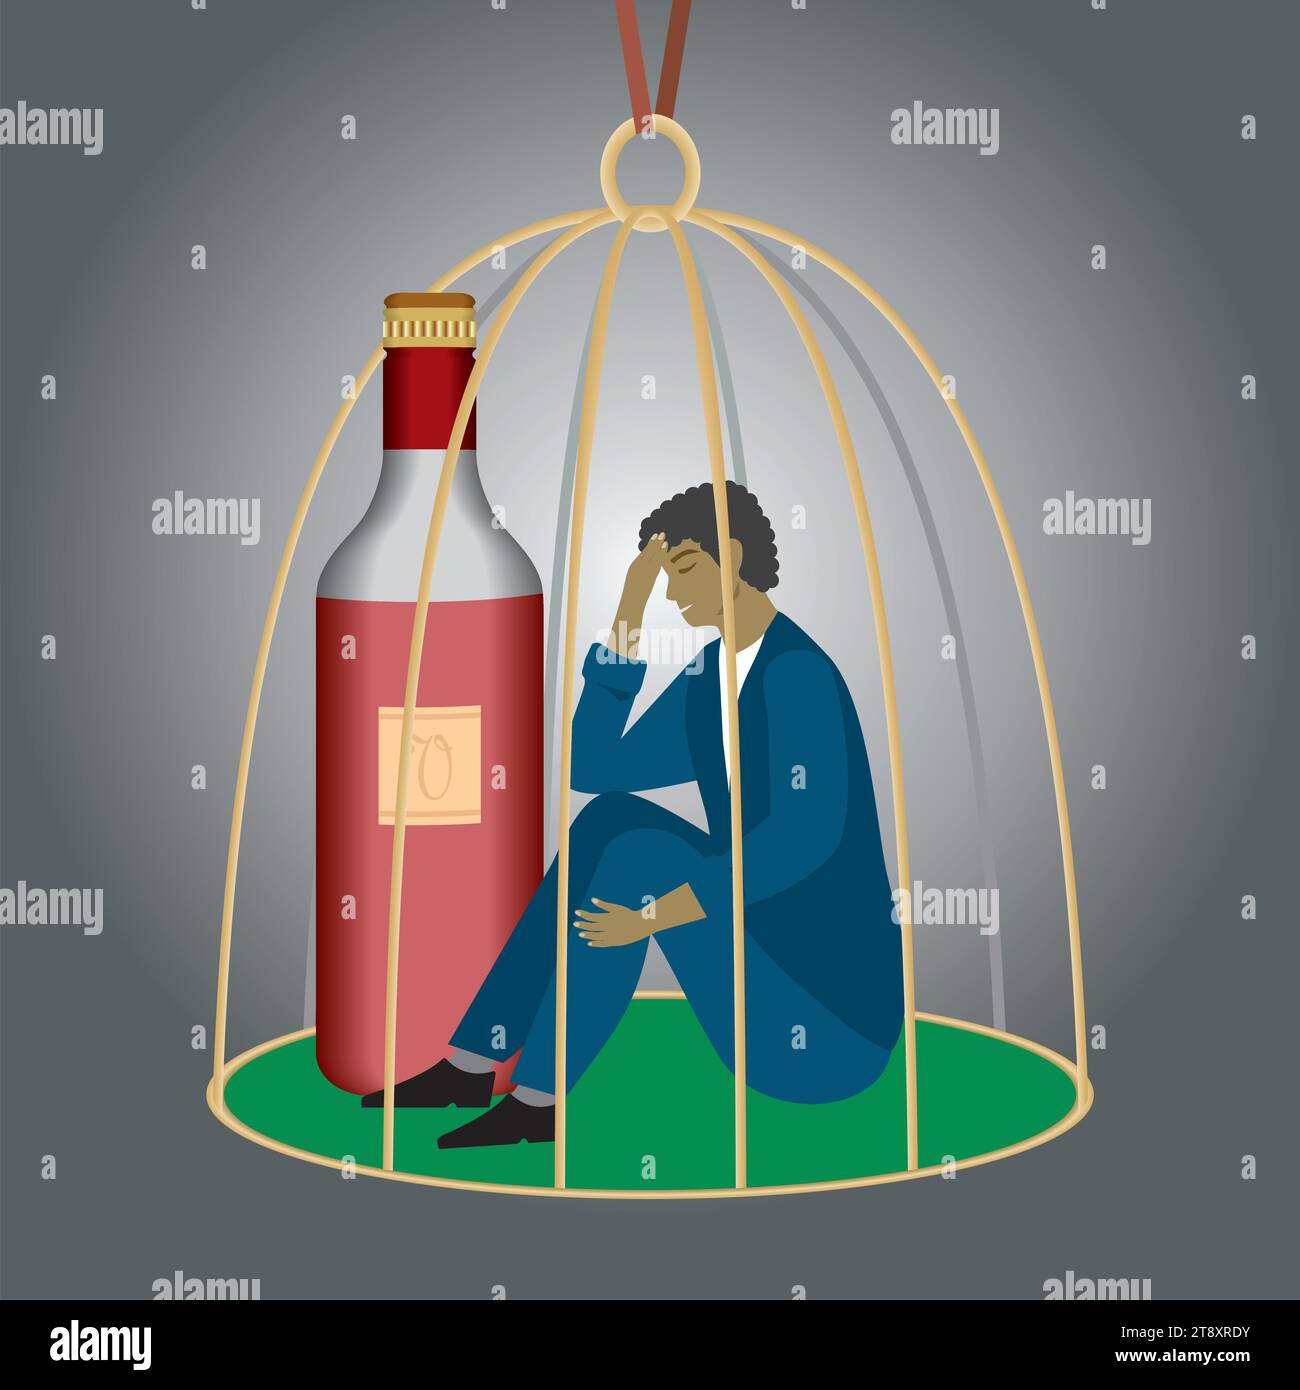 Sad man trapped in birdcage with a bottle of red wine. Square composition. Vector illustration. Stock Vector